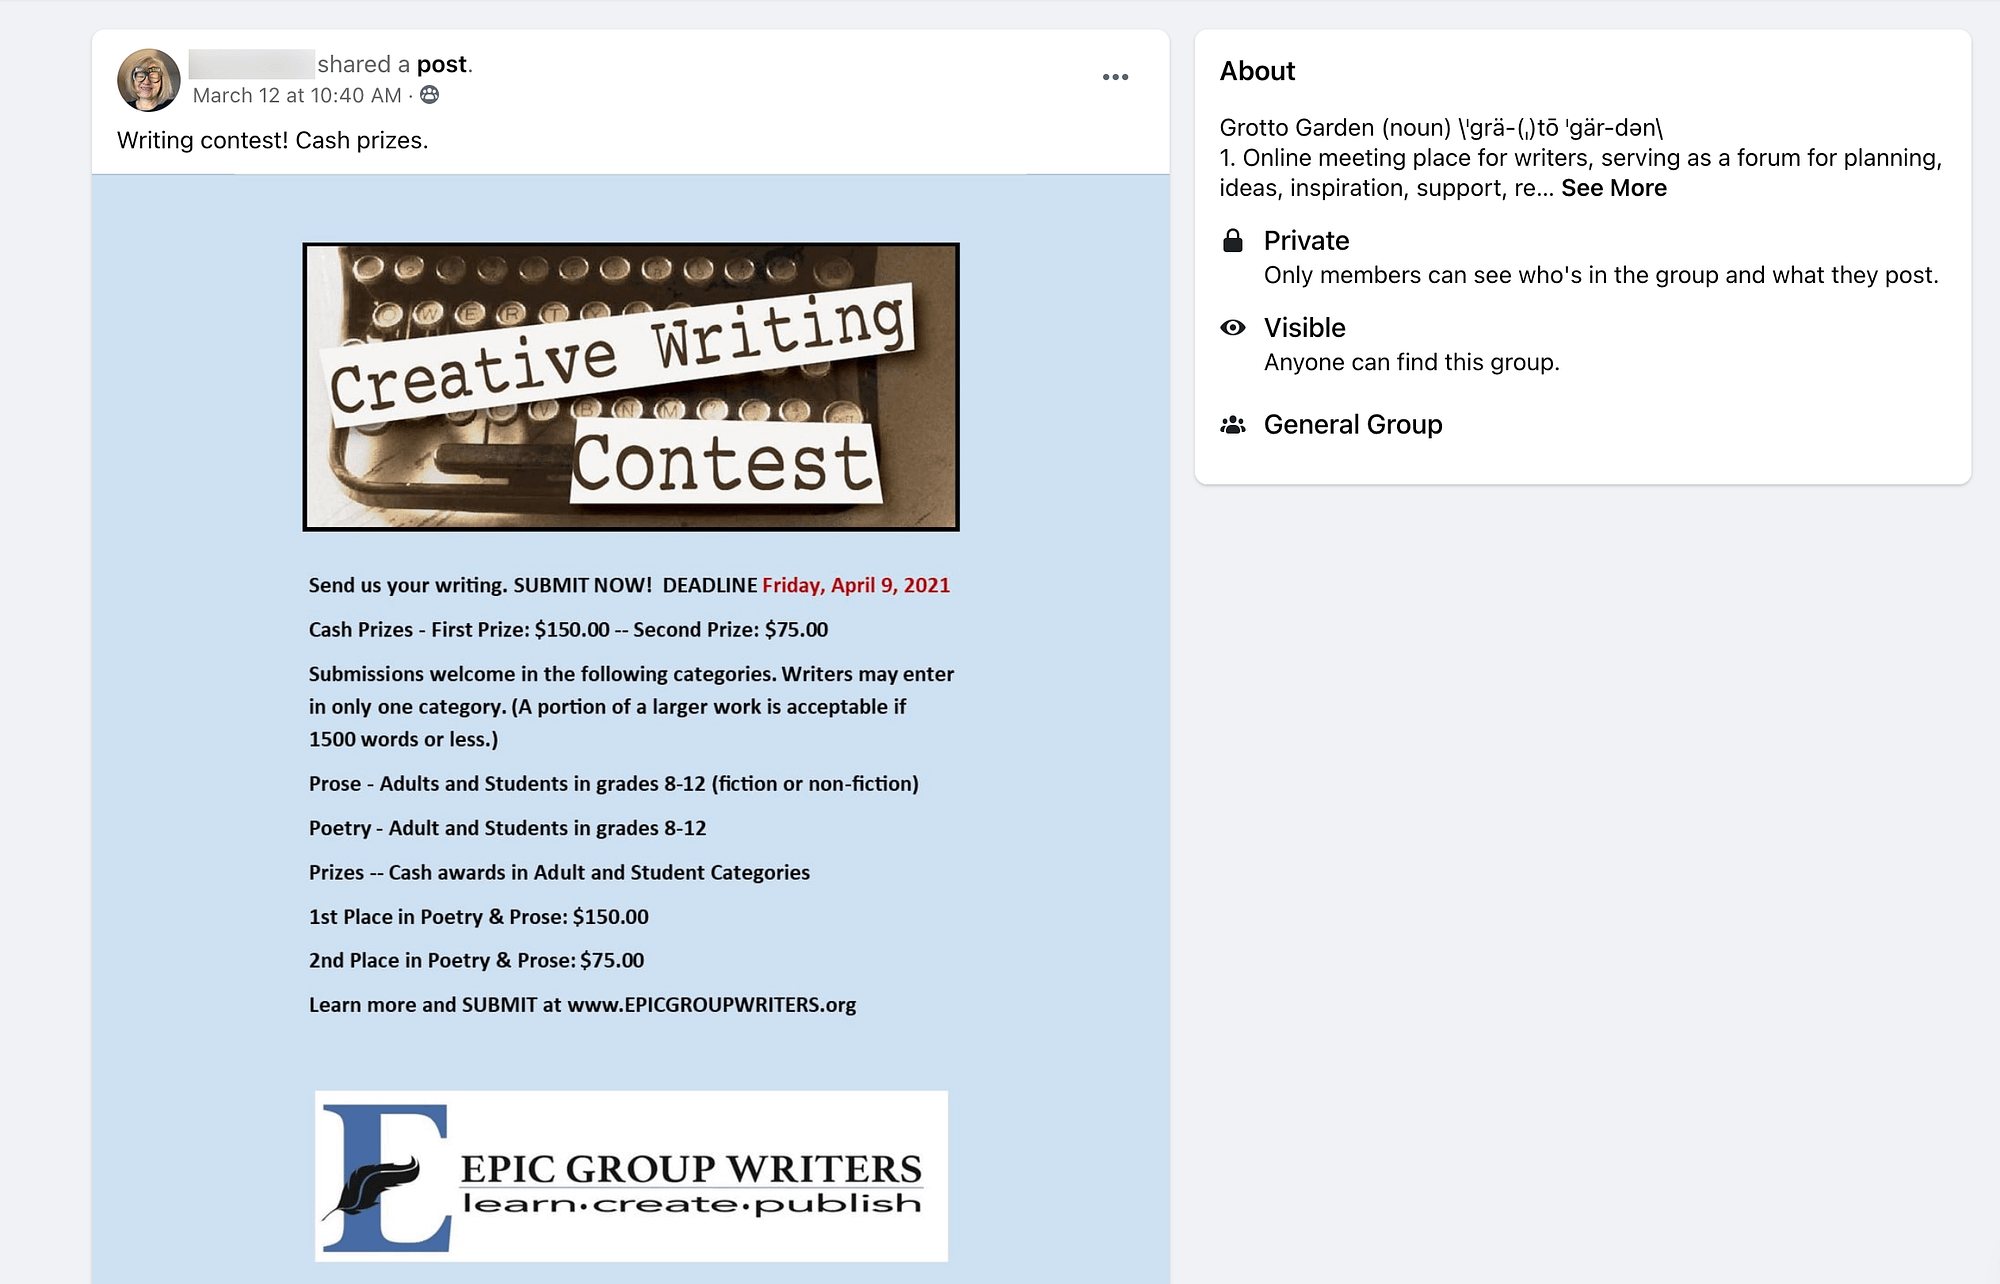 This Facebook contest included details in an image